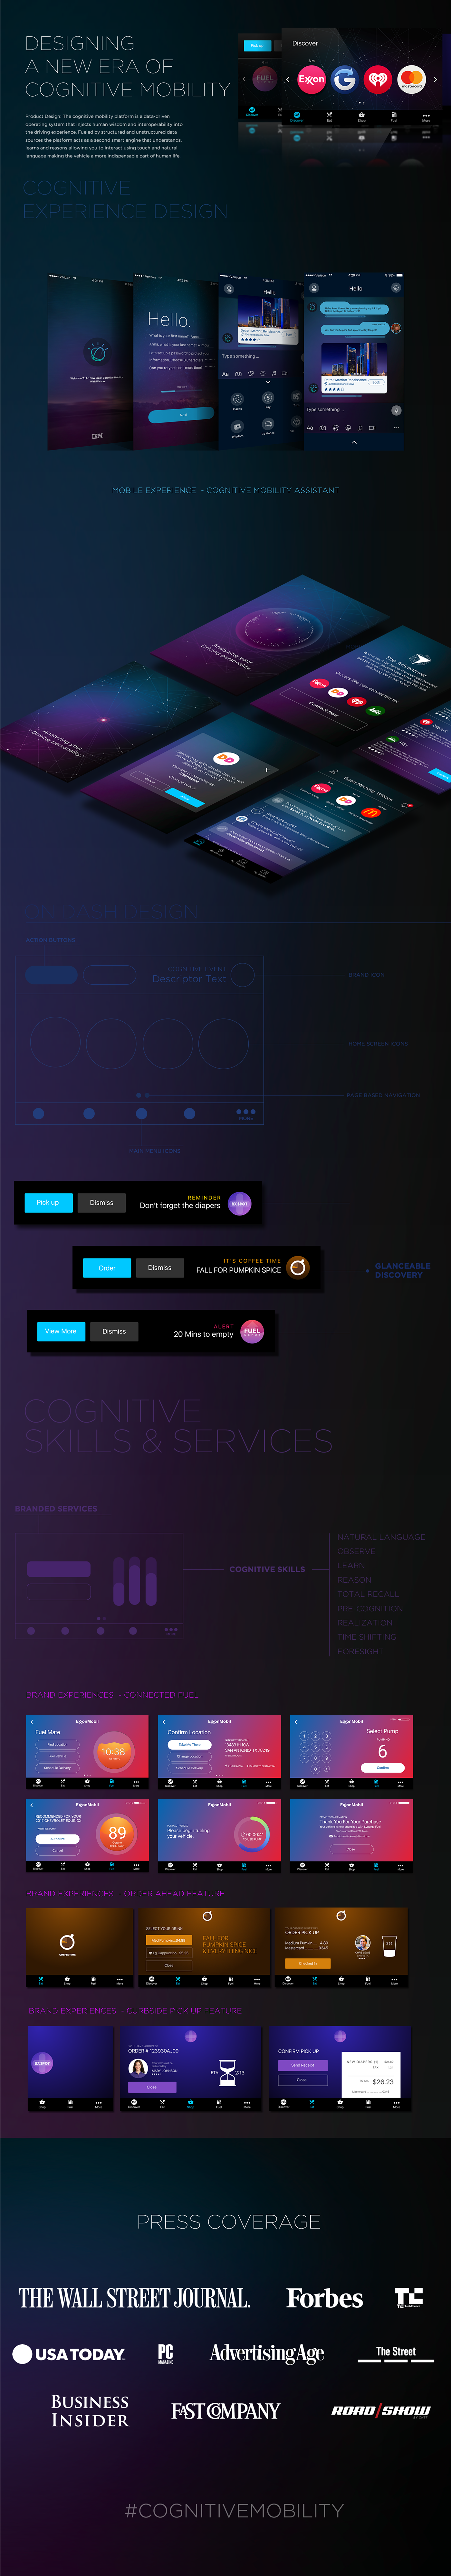 The Cognitive Mobility Platform ai artificial intellegence design mobile interactions